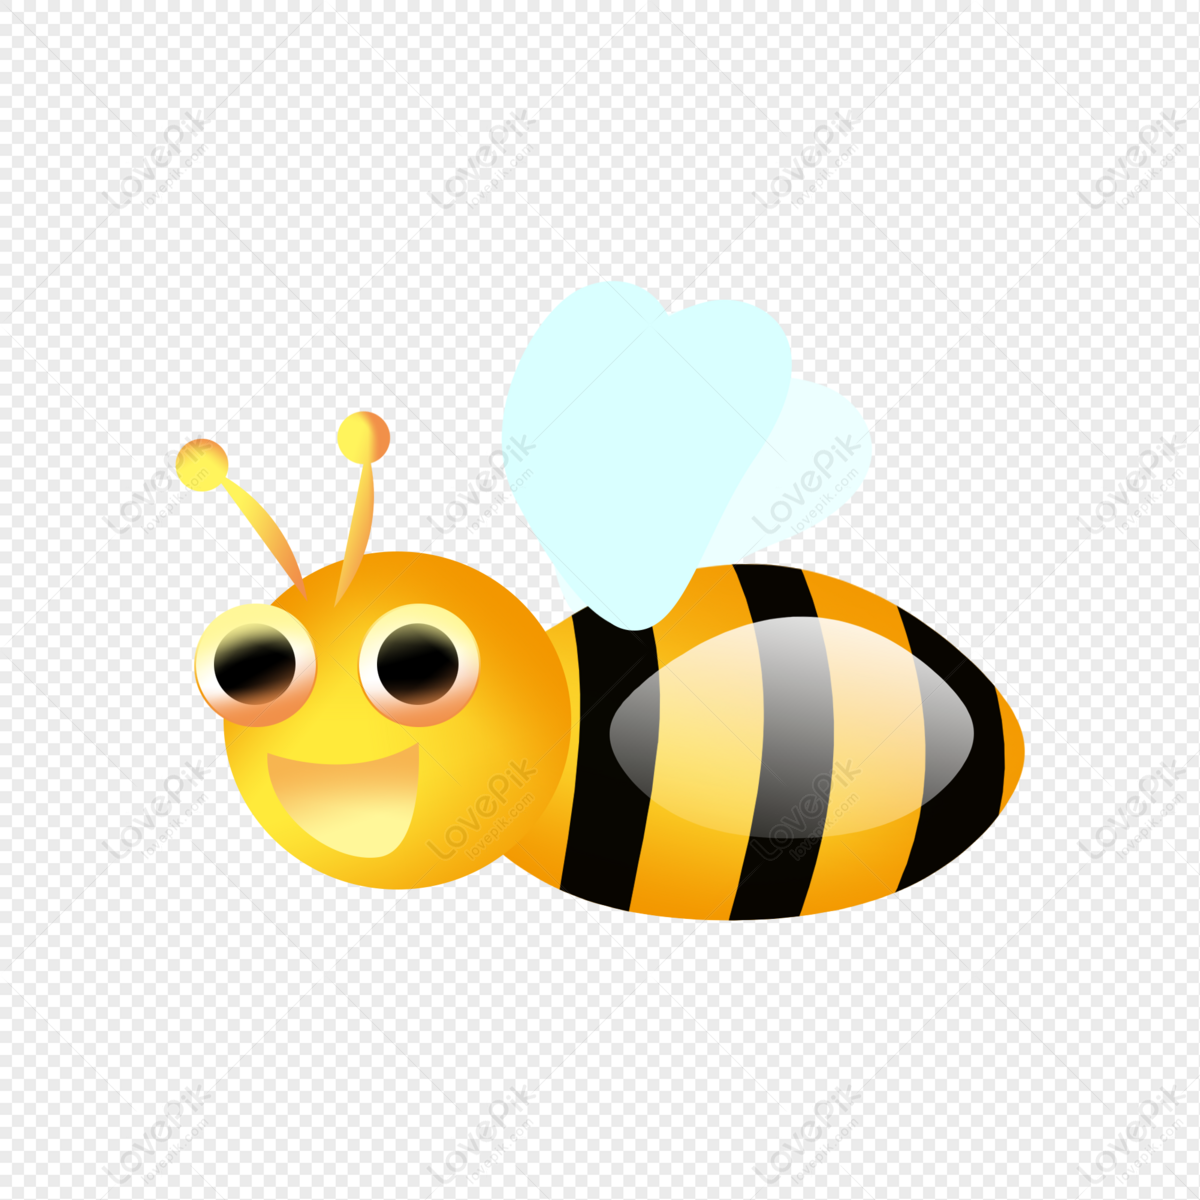 Bee PNG Transparent Image And Clipart Image For Free Download - Lovepik |  401362247